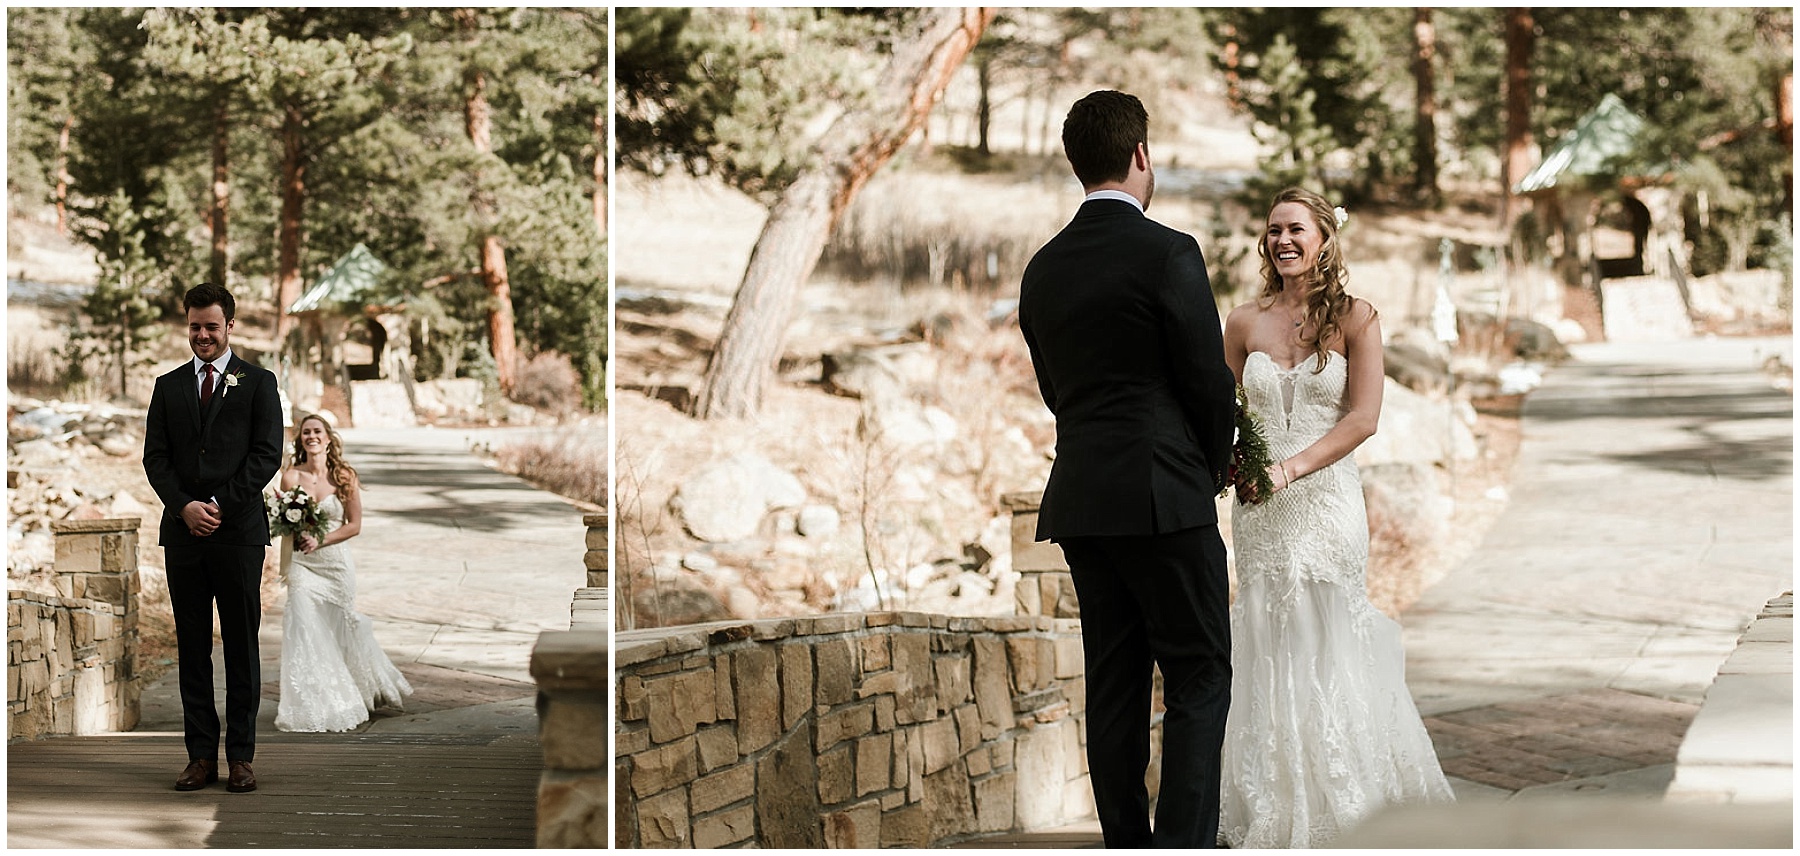 Katesalleyphotography-92_Haley and Dan get married in Estes Park.jpg